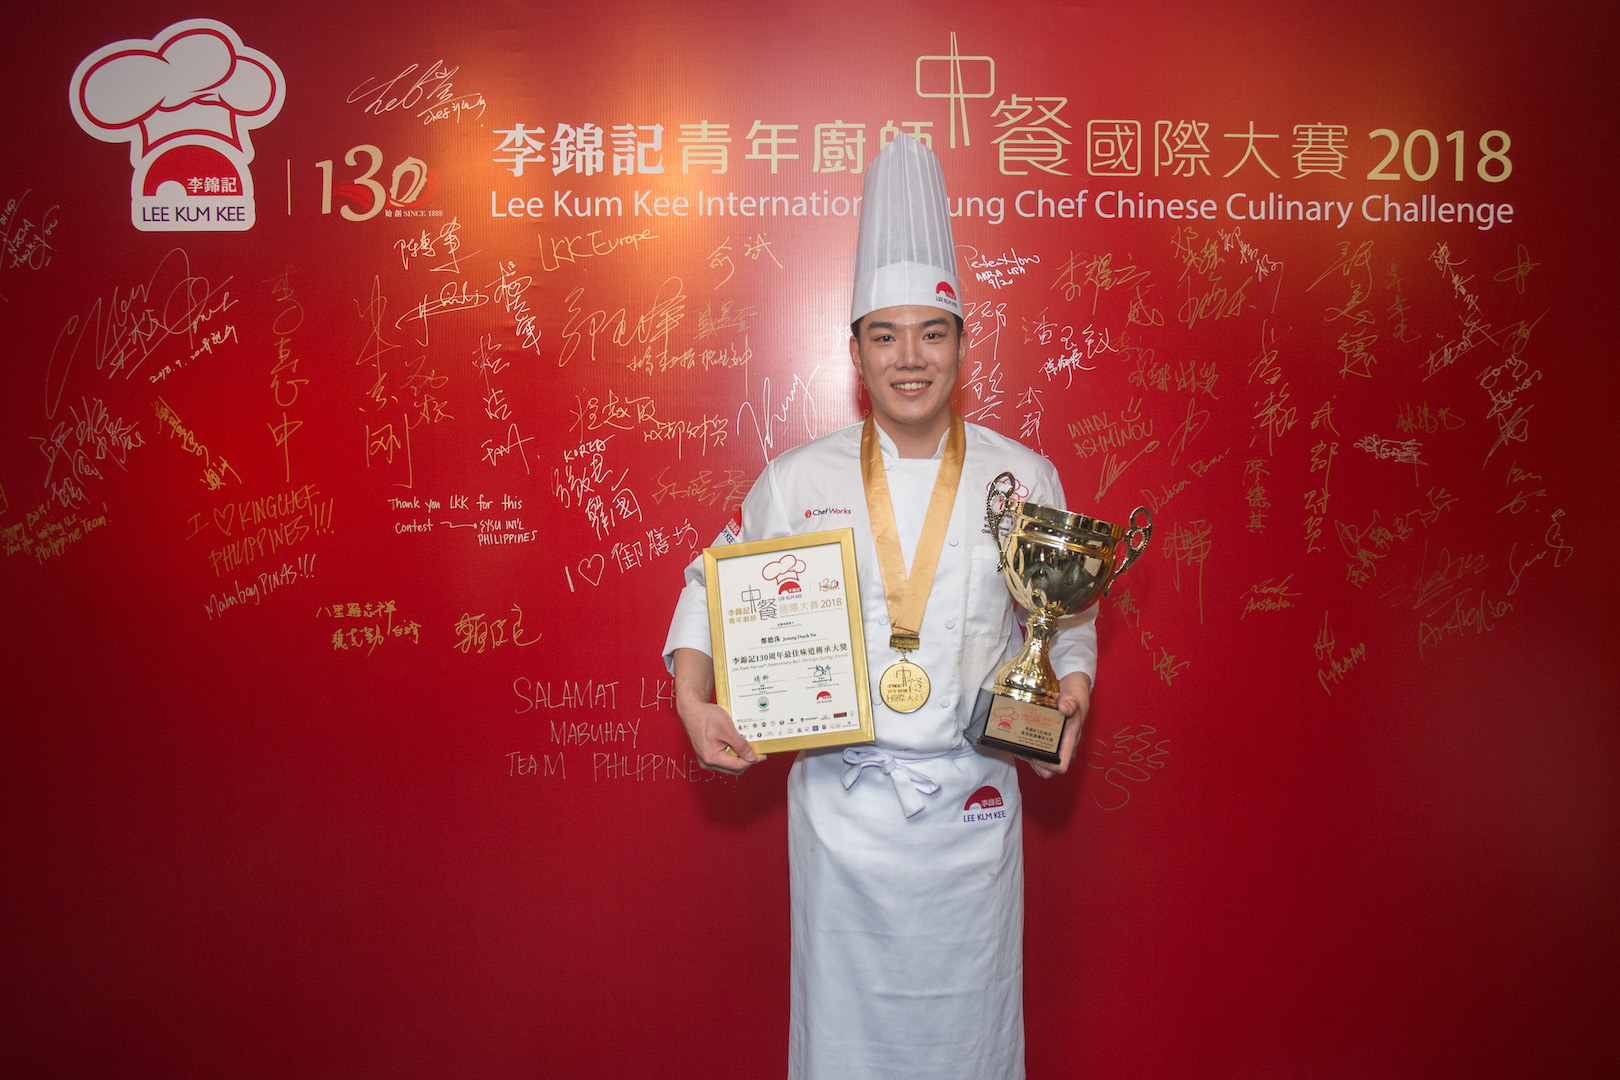 Lee Kum Kee International Young Chef Chinese Culinary Challenge 2018